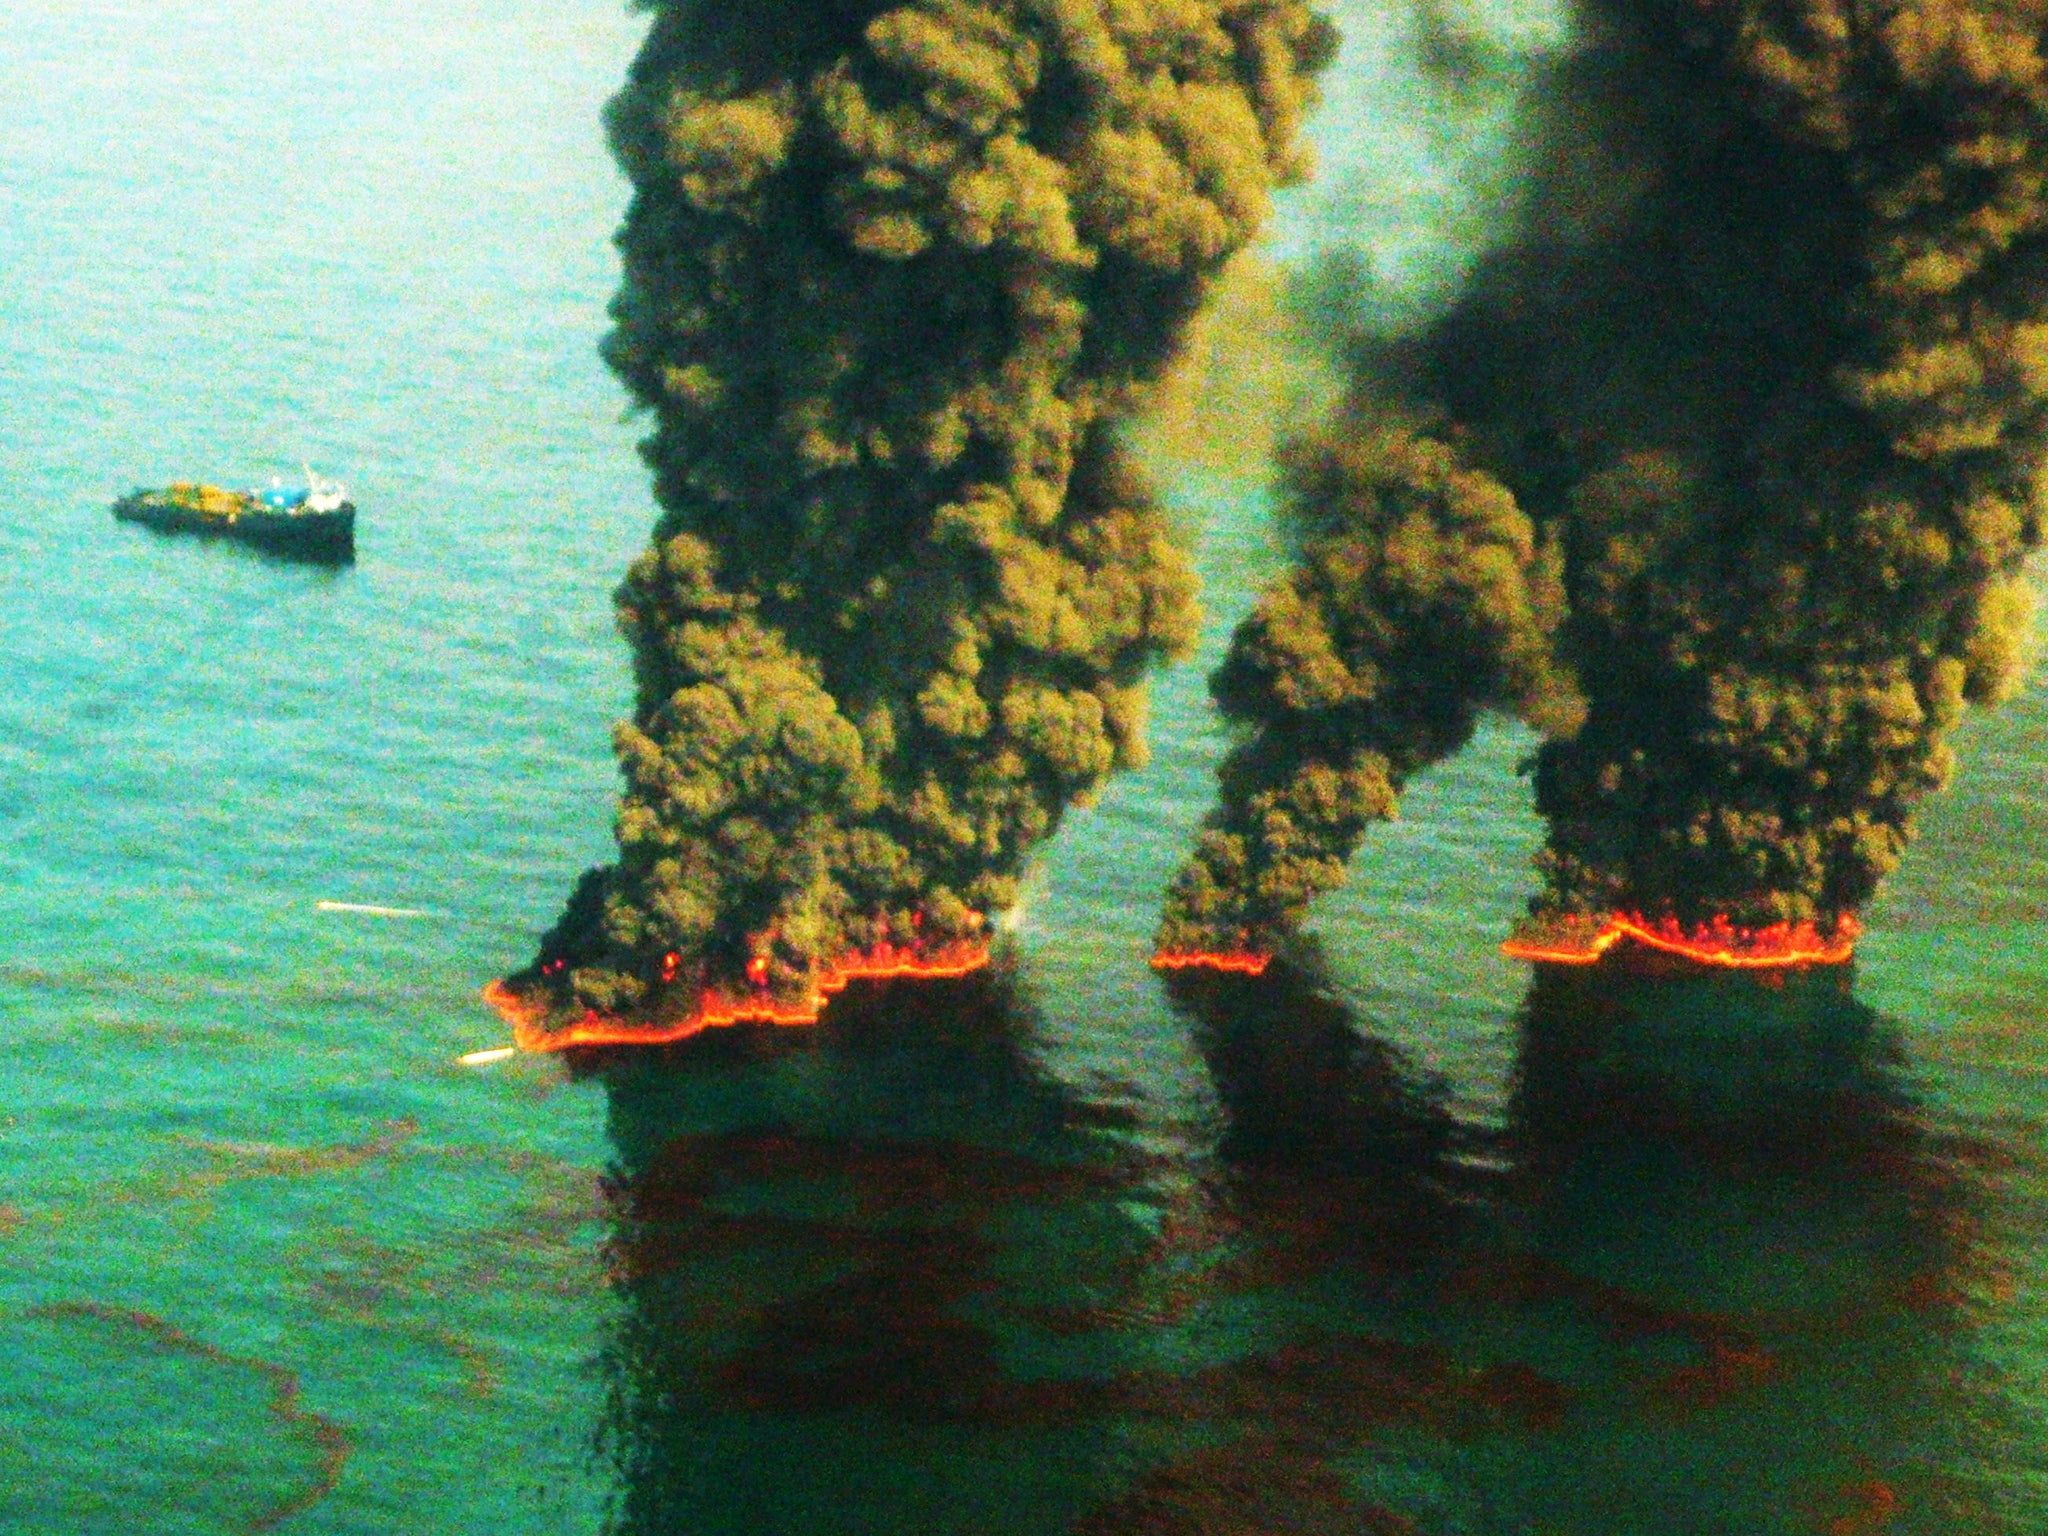 Plumes of smoke rise from a controlled burn during the Deepwater Horizon oil spill in 2010